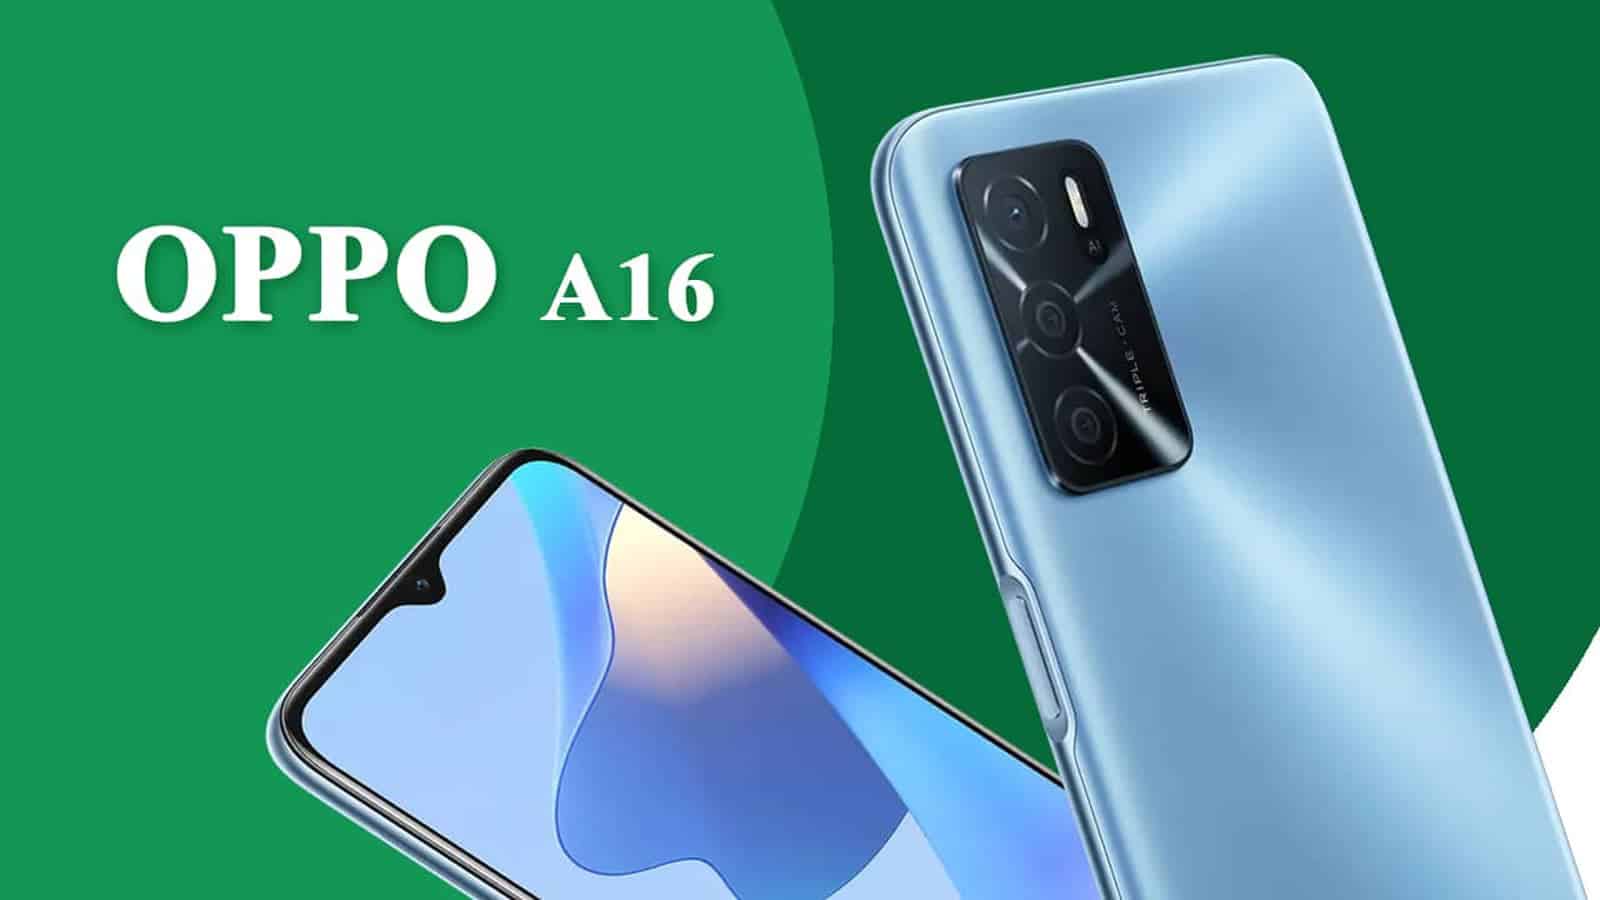 Oppo A16 specs: Helio G35 chipset, 5000mAh battery, Price!